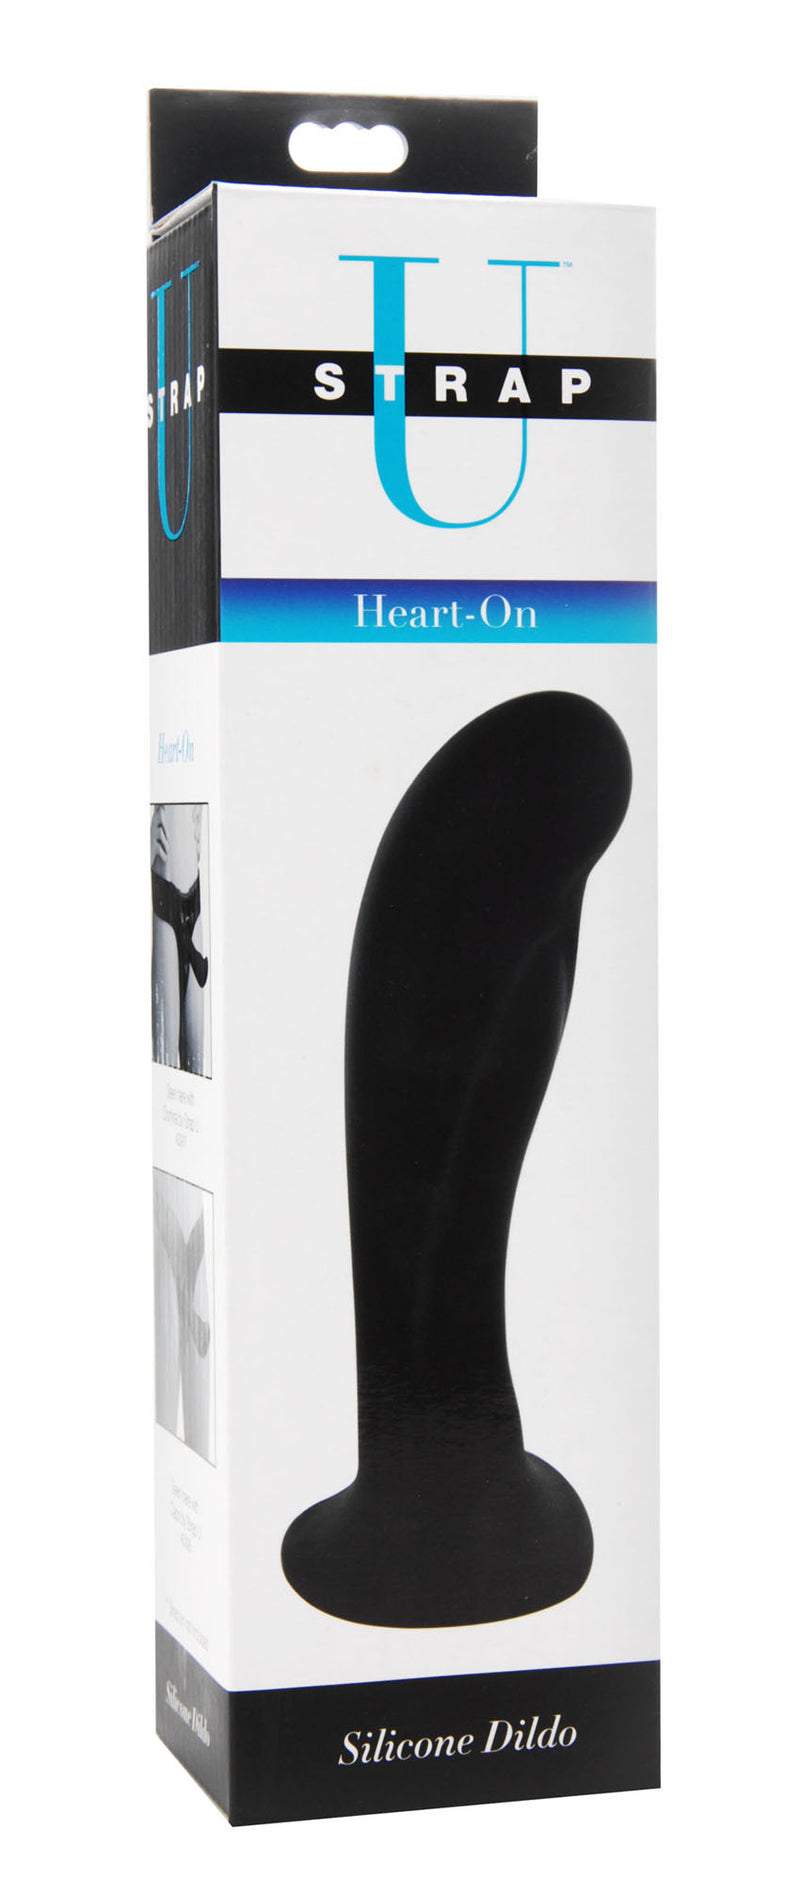 Matte Silicone Dildo with Heart-Shaped Base for Strap-On Play and G-Spot Stimulation - 6 Inches